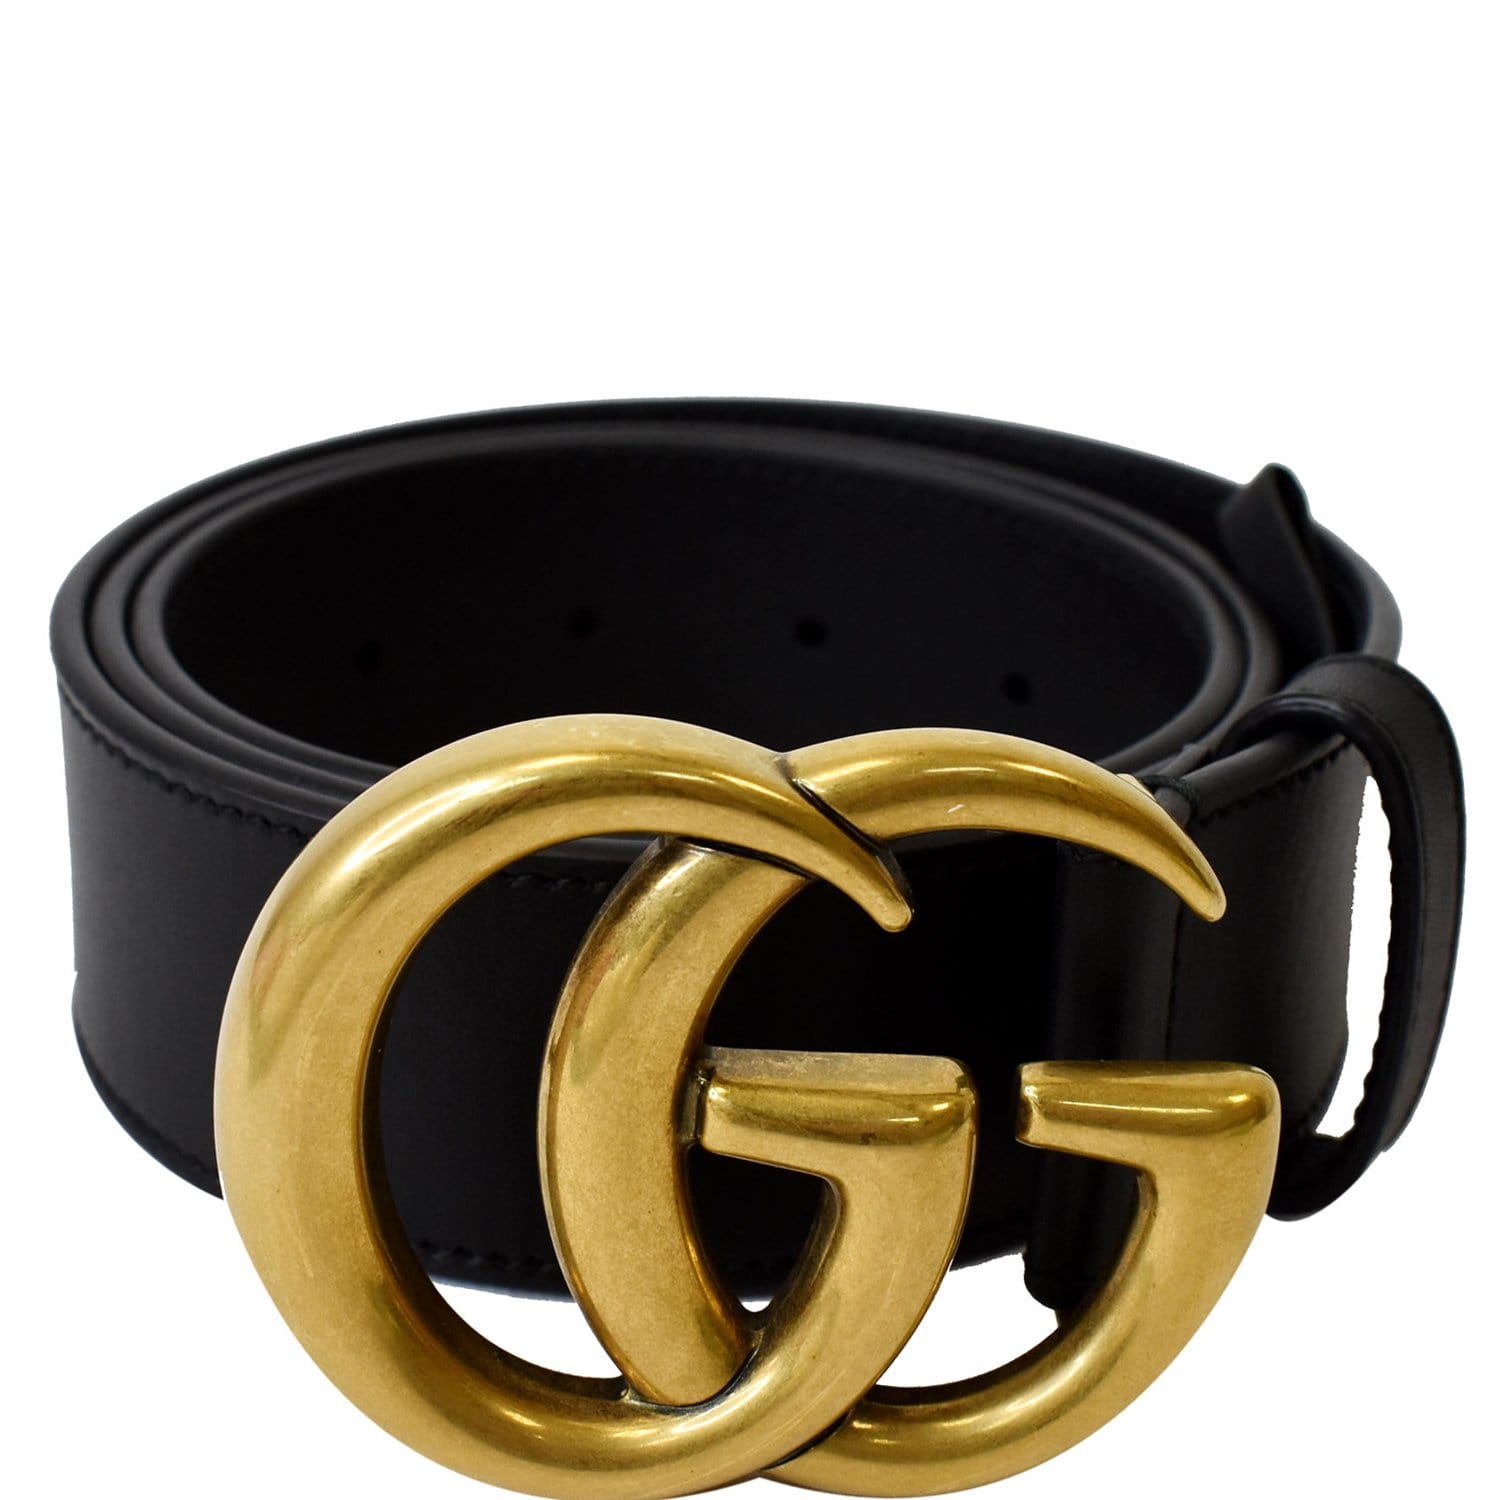 Gucci Men's Leather Belt with Double G Buckle